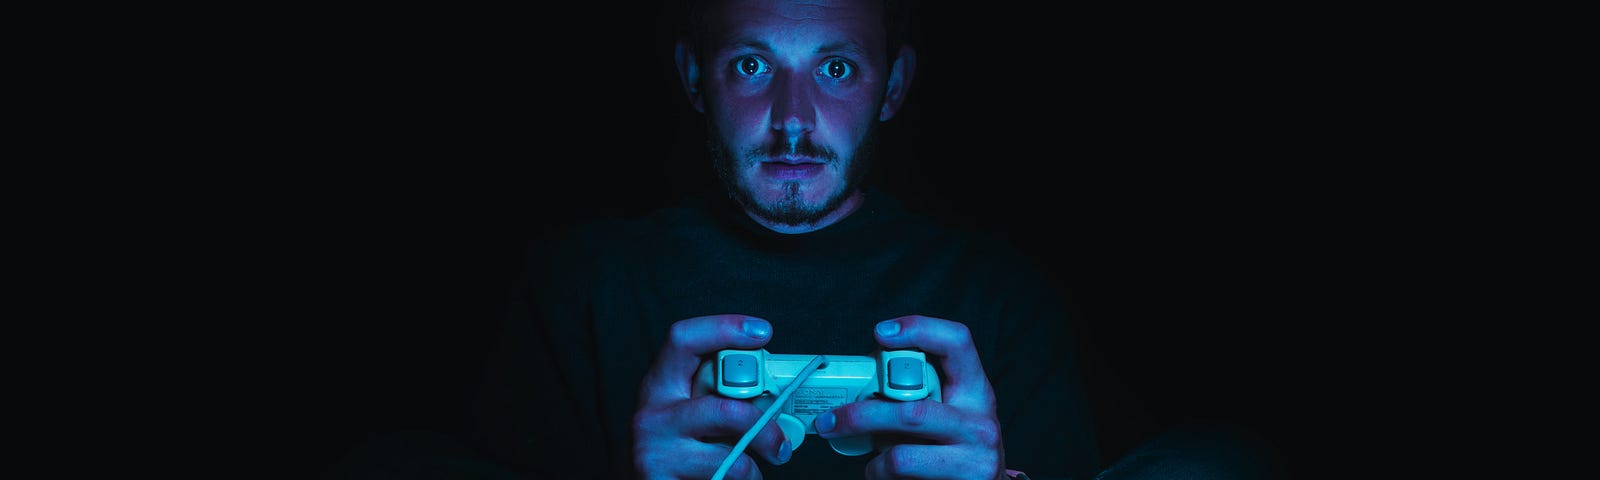 A man playing online games in the dark